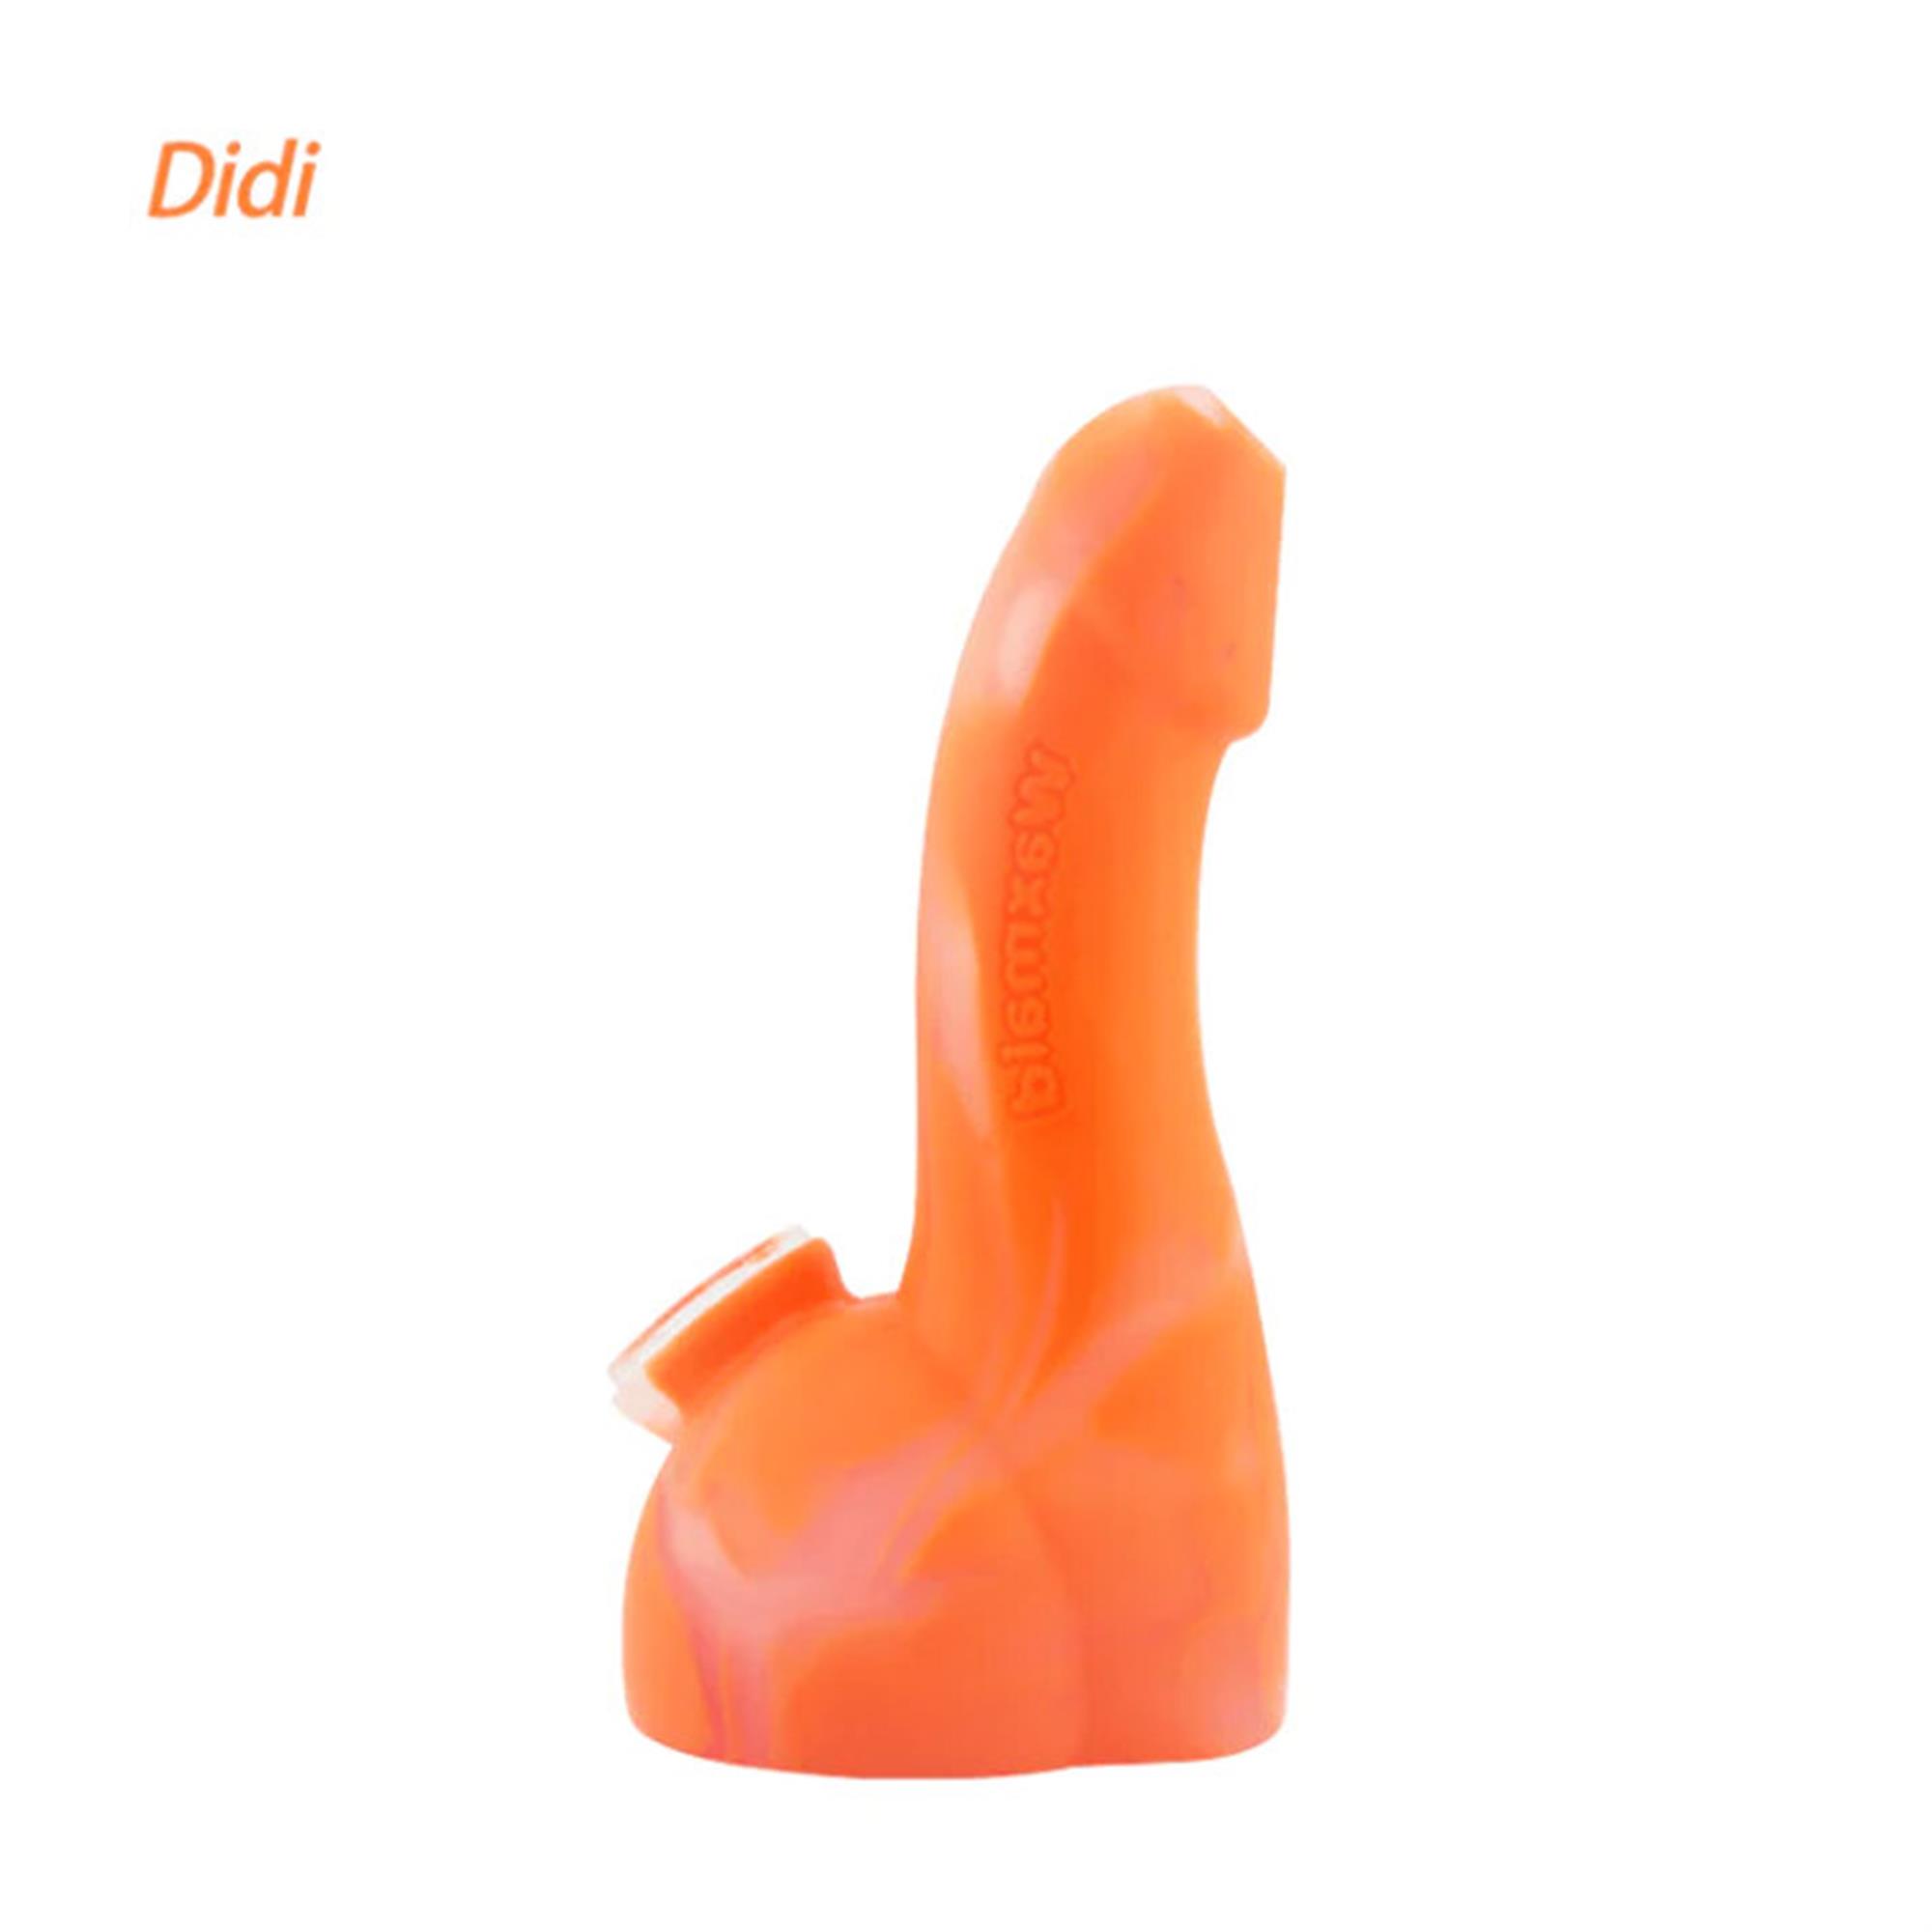 WAXMAID DIDI PENIS SILICONE 6 INCH DRY PIPE